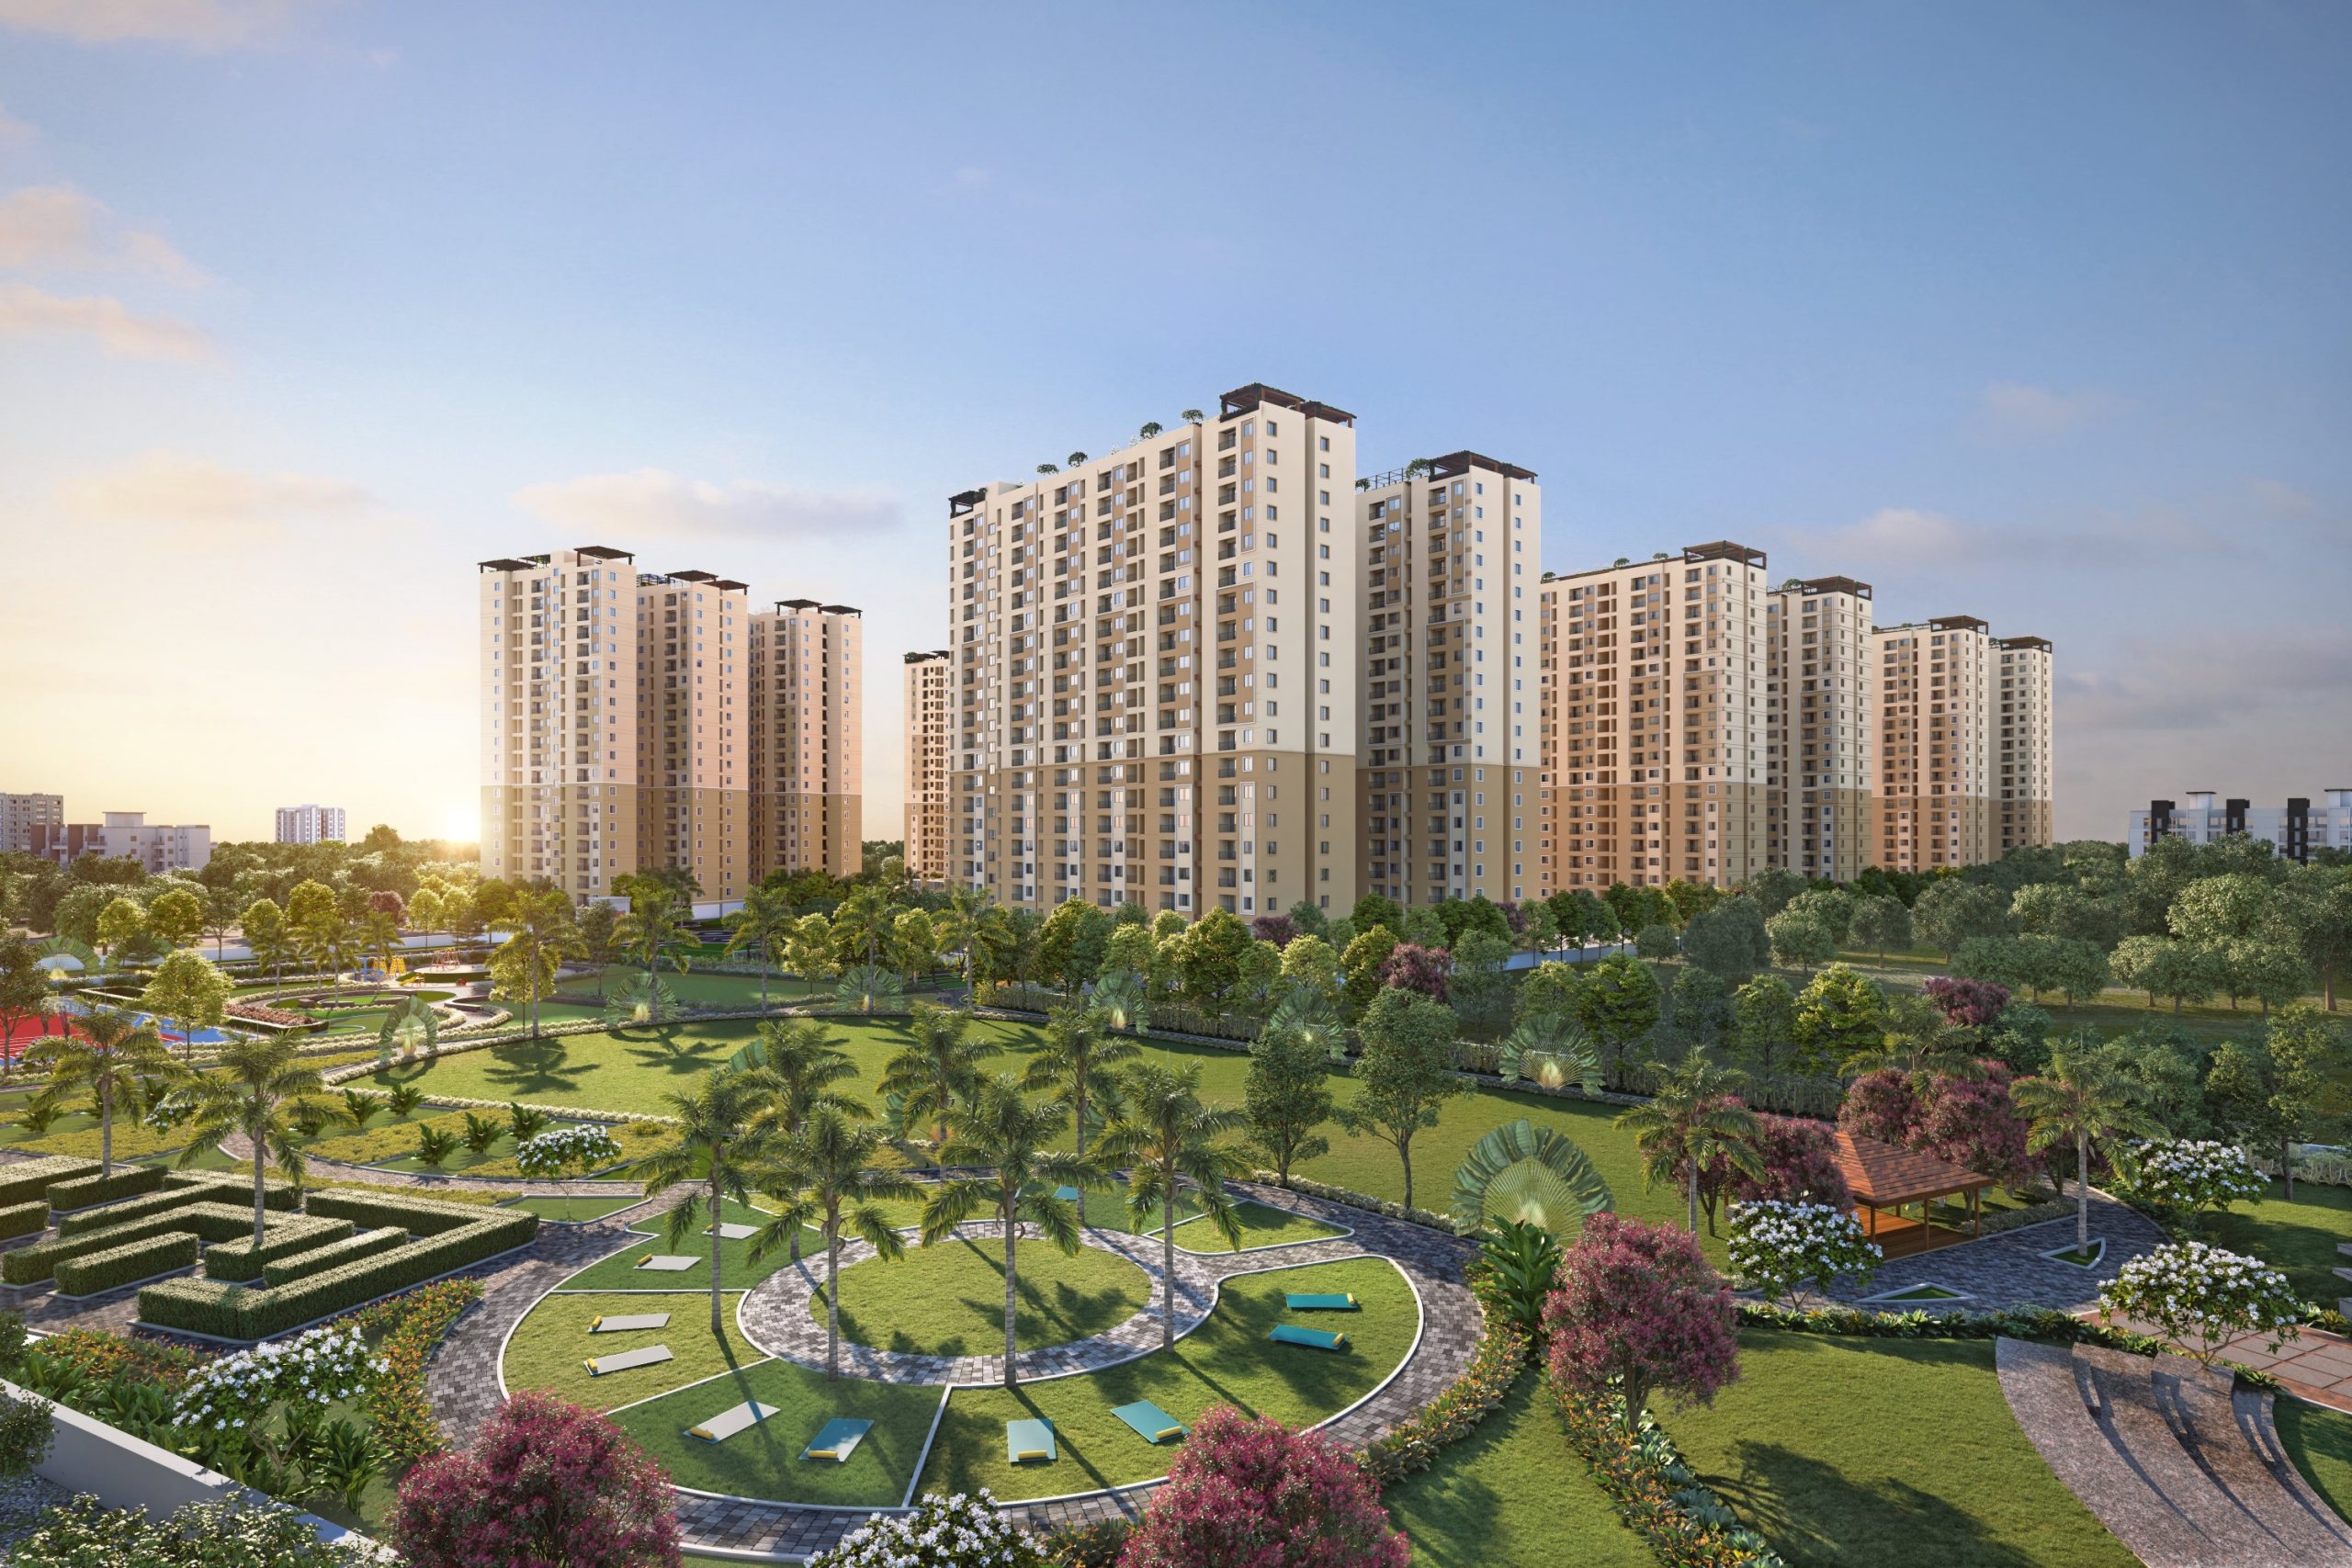 Motilal Oswal private equity invests in Urbanrise- Alliance - Apartments for Sale in Chennai